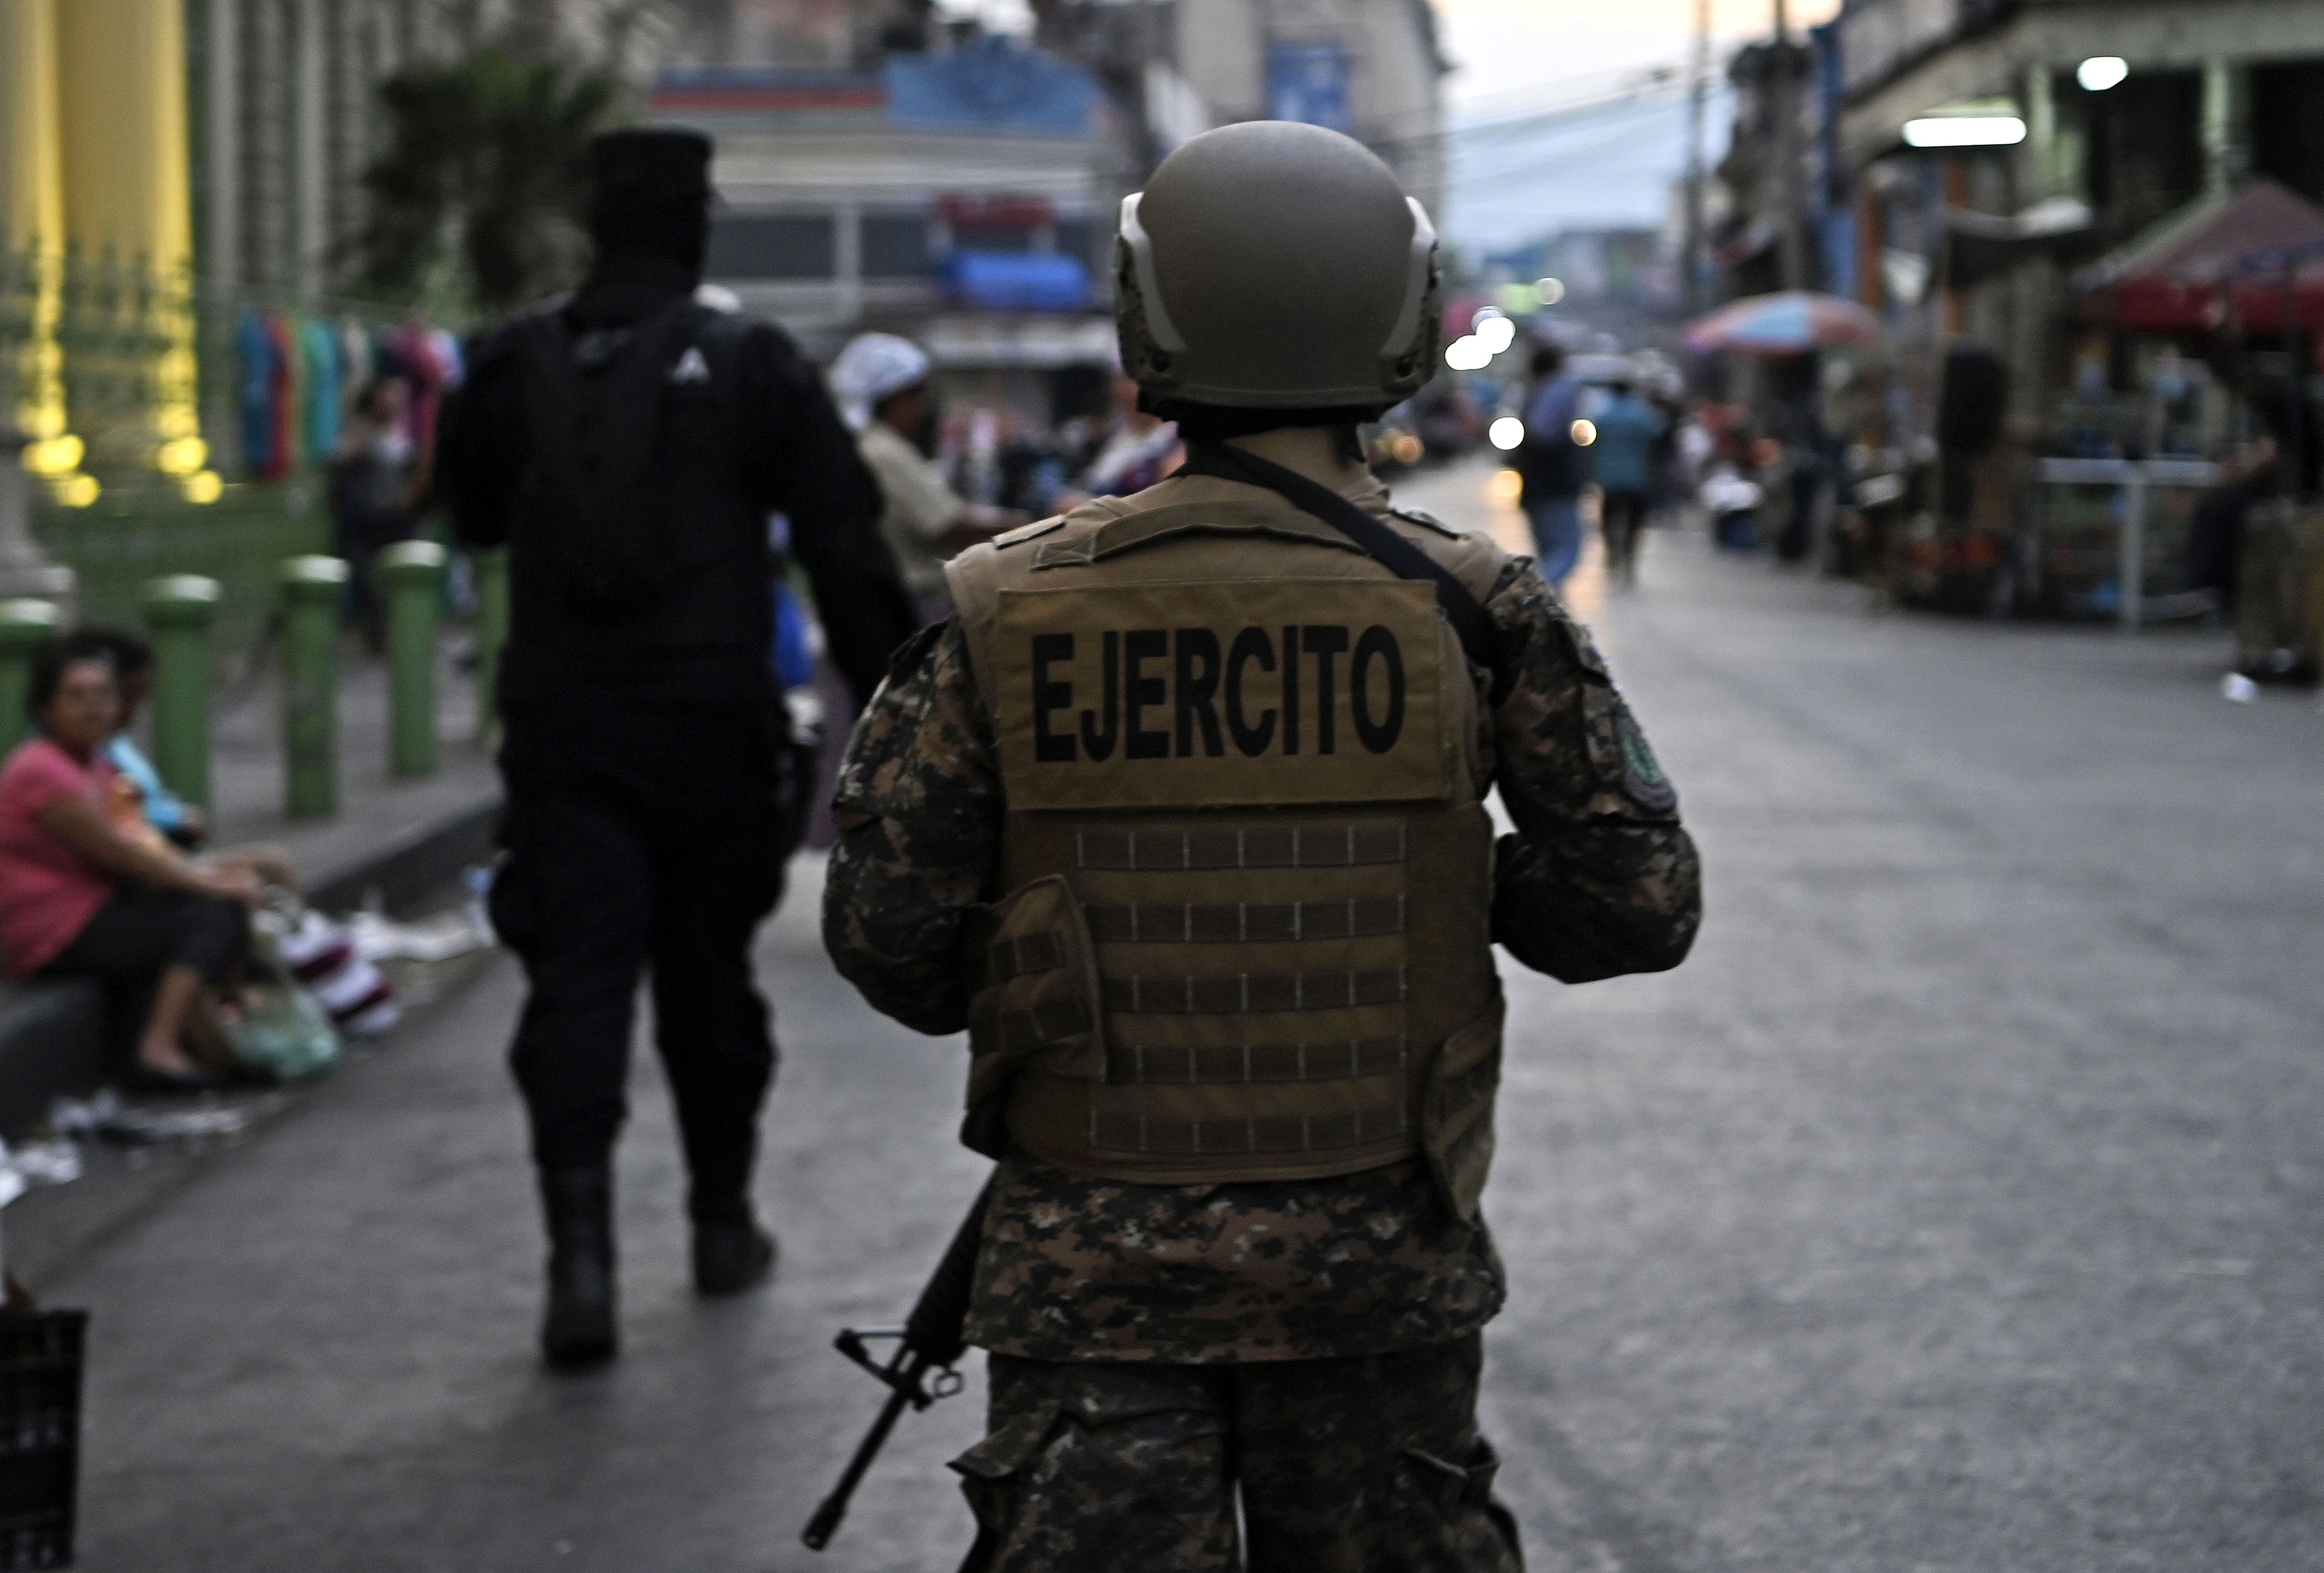 A member of the El Salvador military clears people from the historic center of San Salvador as part of the government's emergency decree to curb the spread of coronavirus, on March 21.